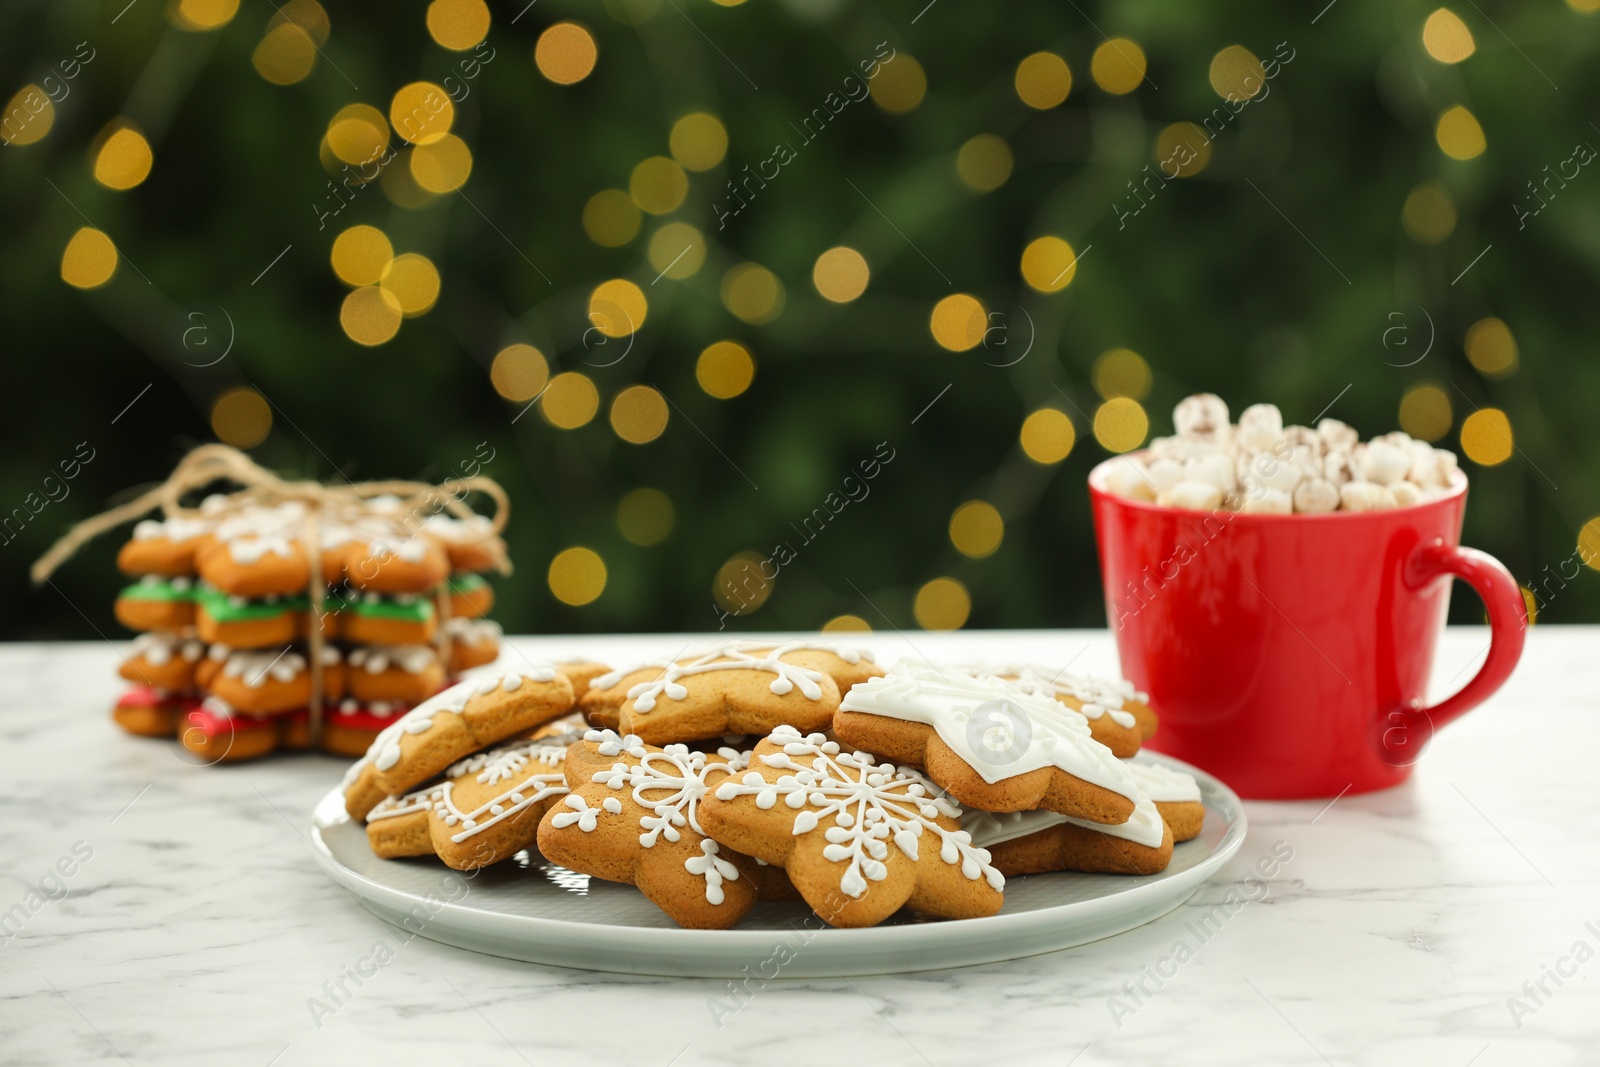 Photo of Decorated cookies and hot drink on white marble table against blurred Christmas lights